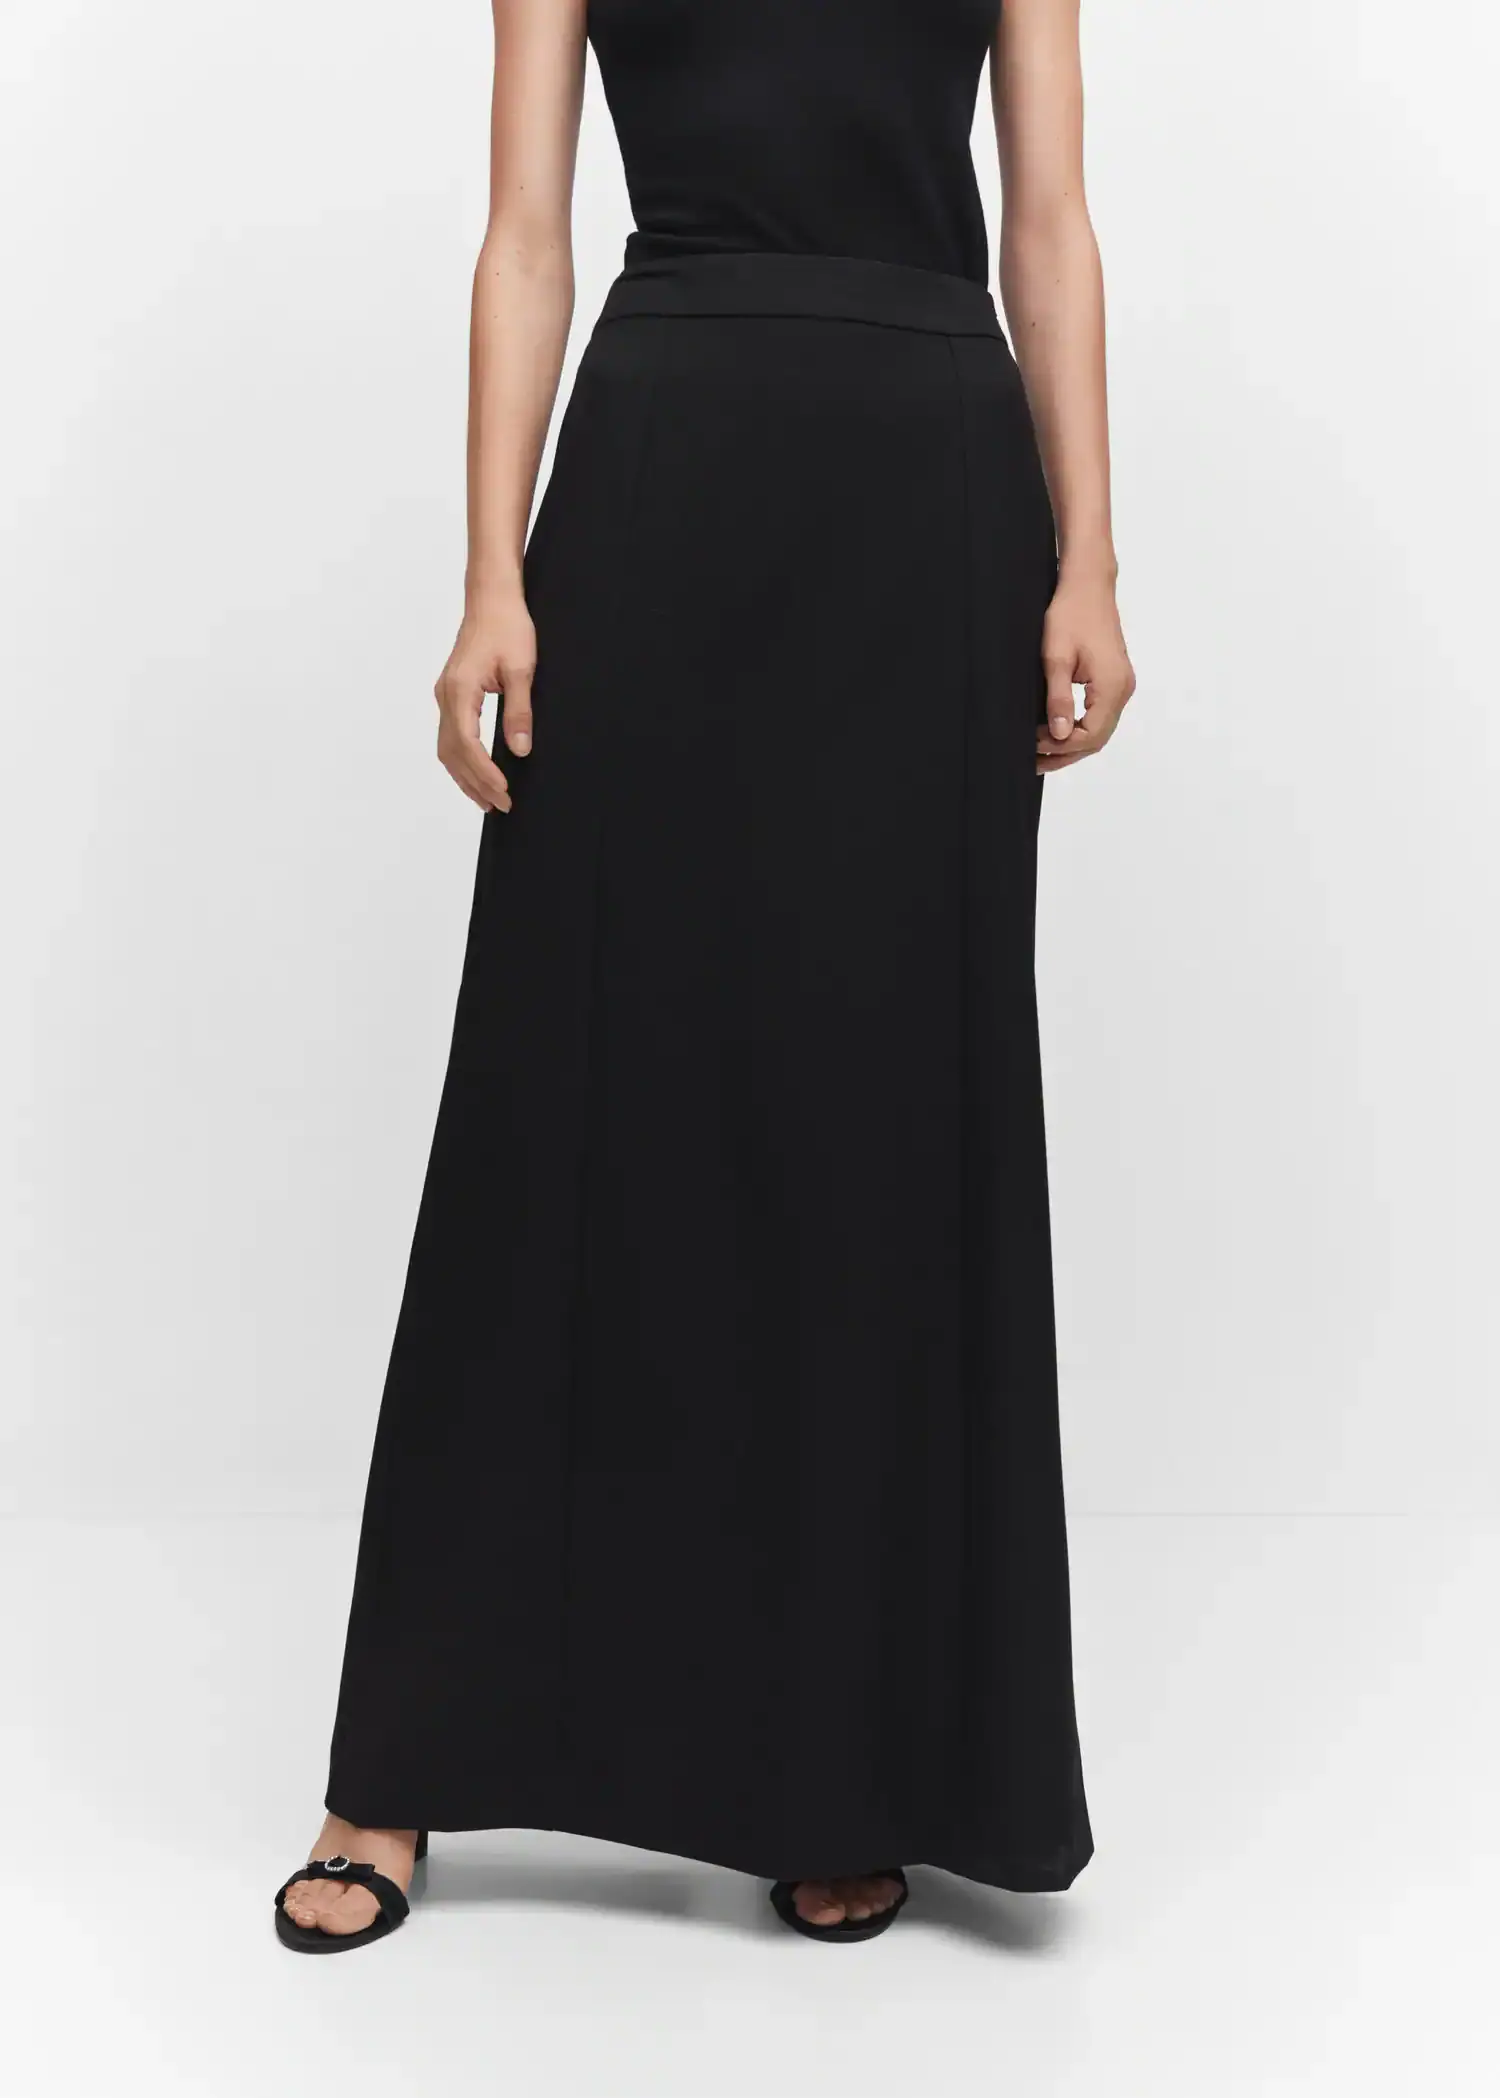 Mango Flowy long skirt. a woman wearing a black dress standing in front of a white wall. 